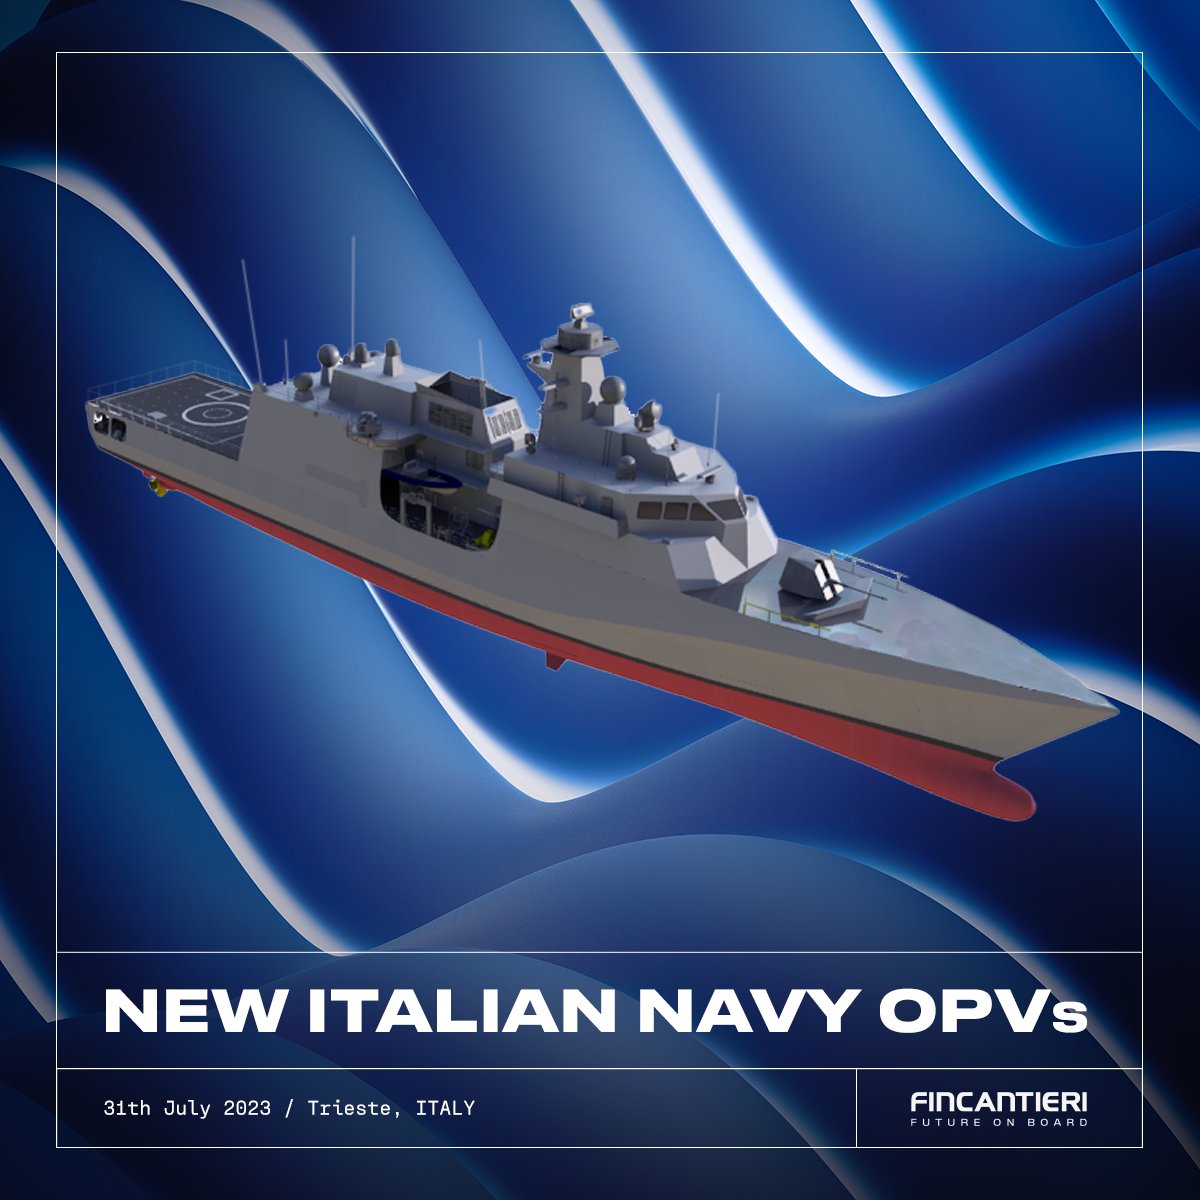 Concept of Italian Navy's future offshore patrol vessels